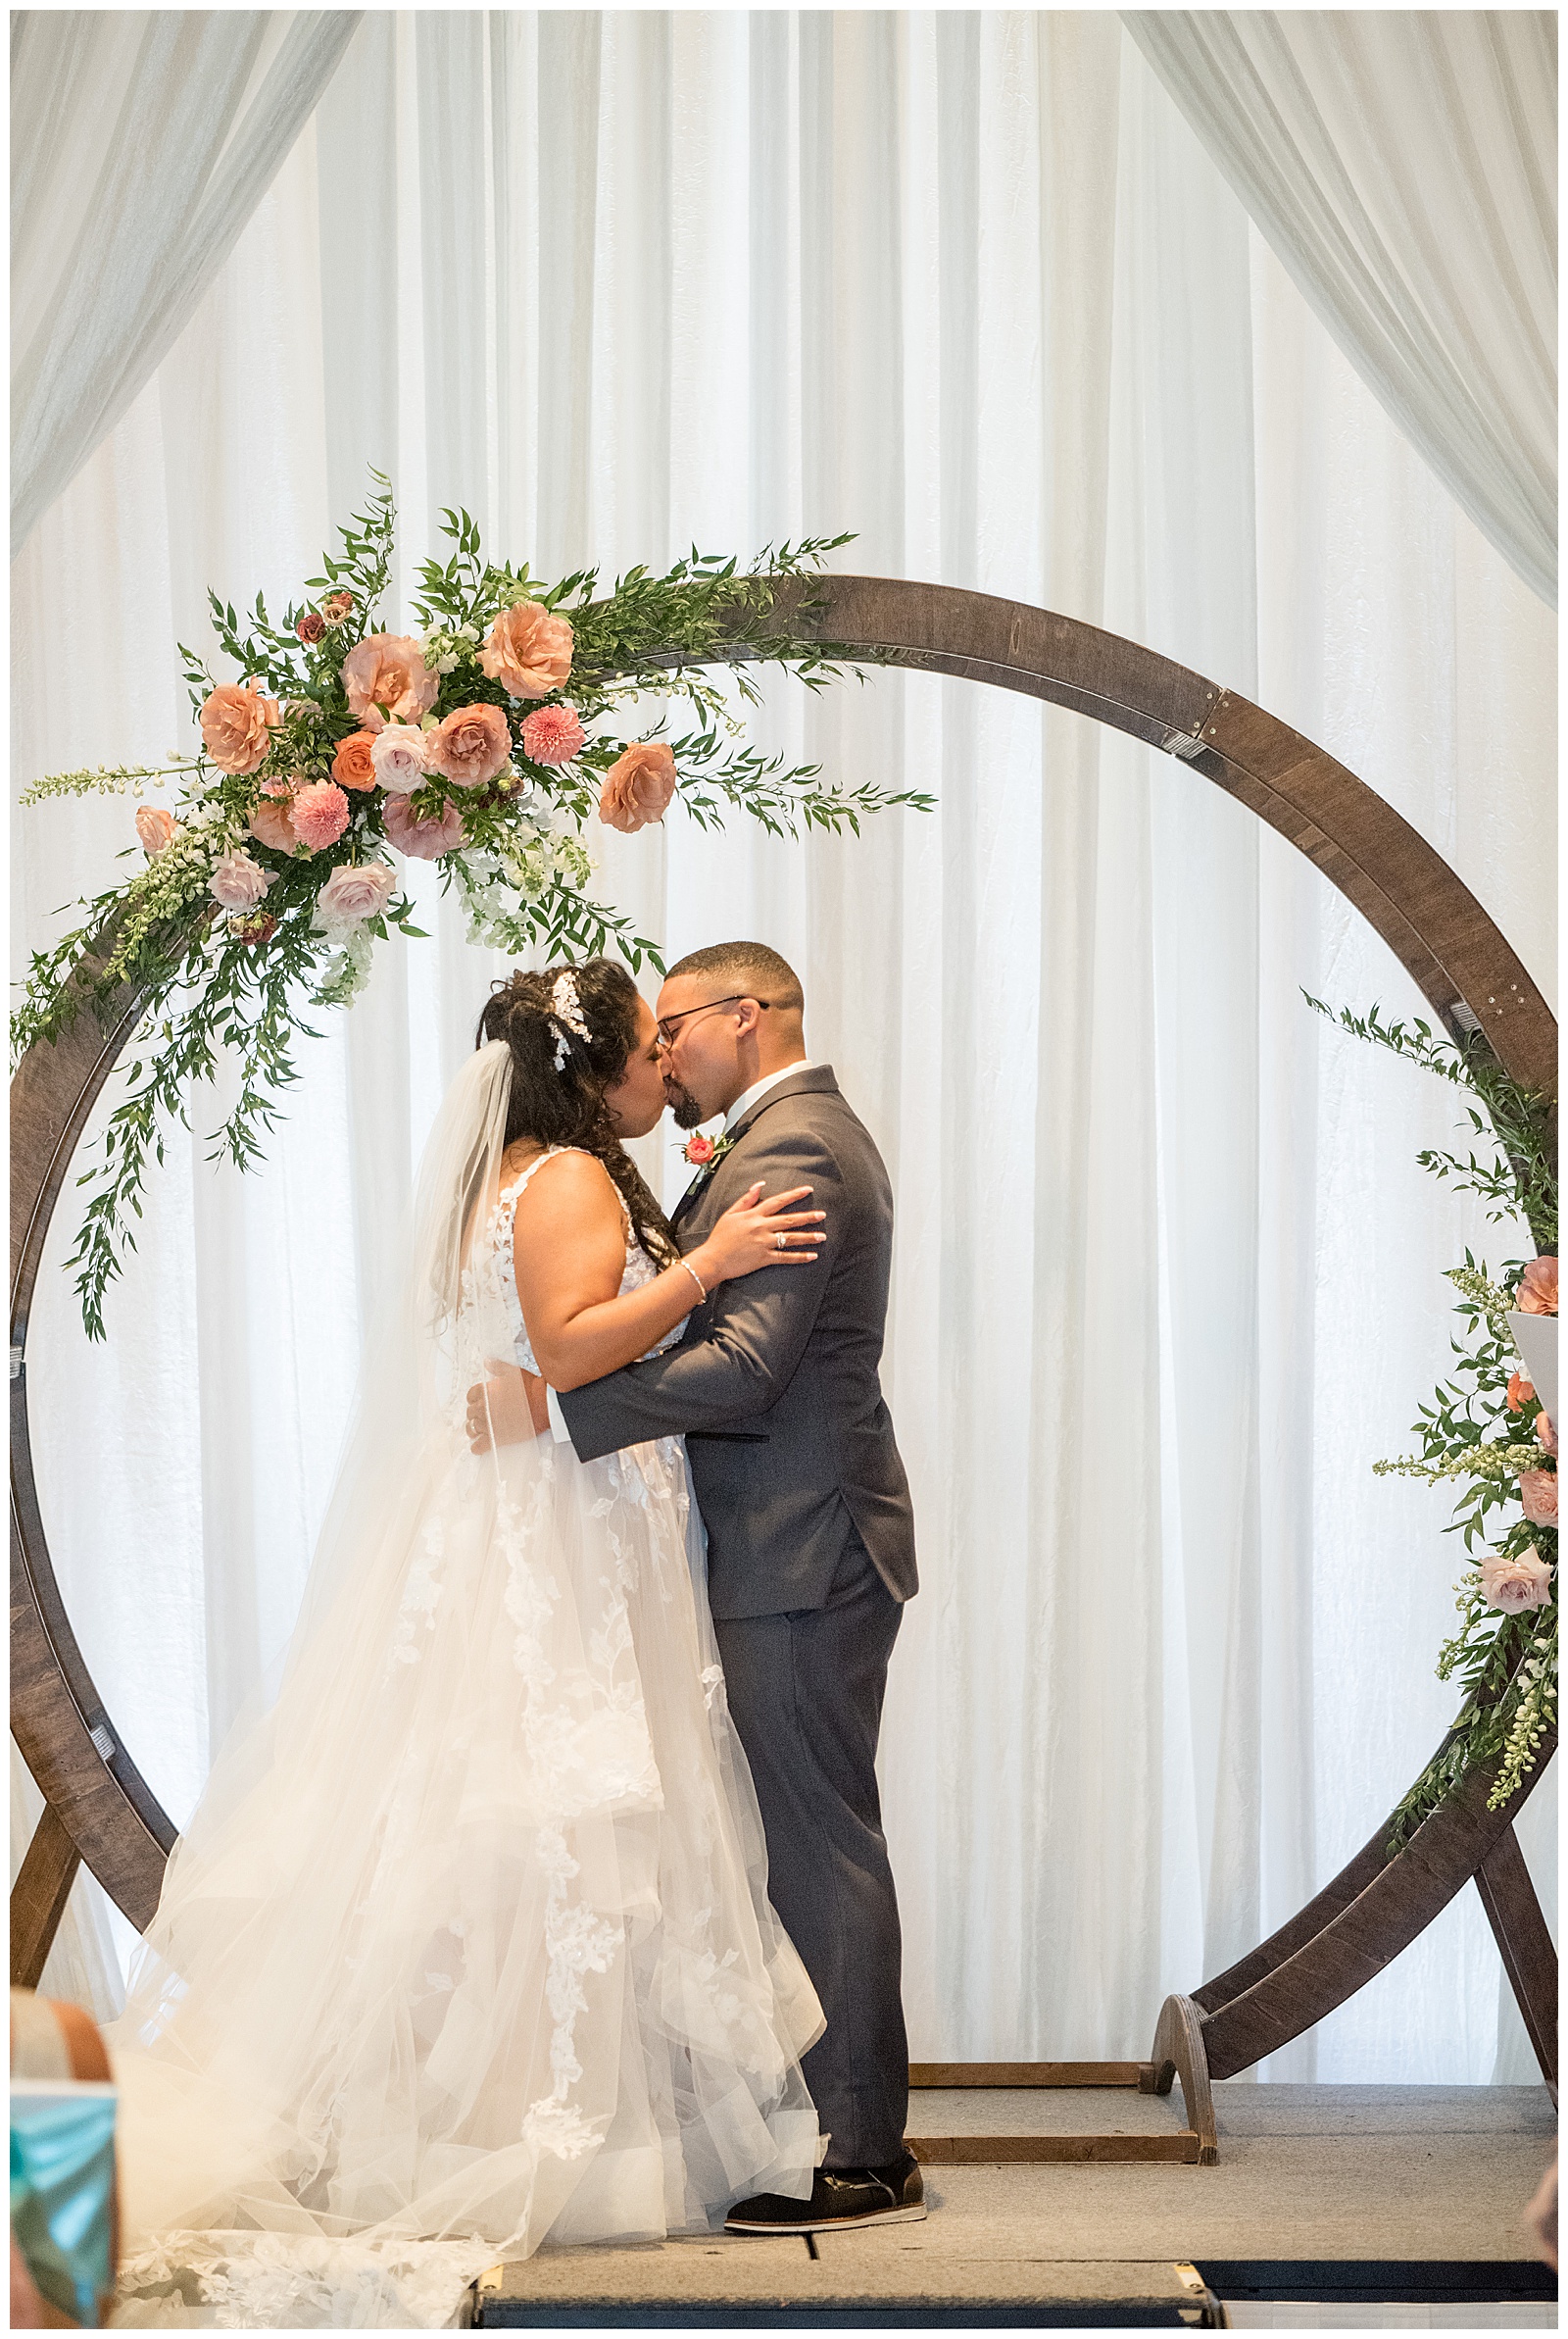 bride and groom share their first kiss during wedding ceremony inside the lancaster marriott in penn square by wooden and floral display